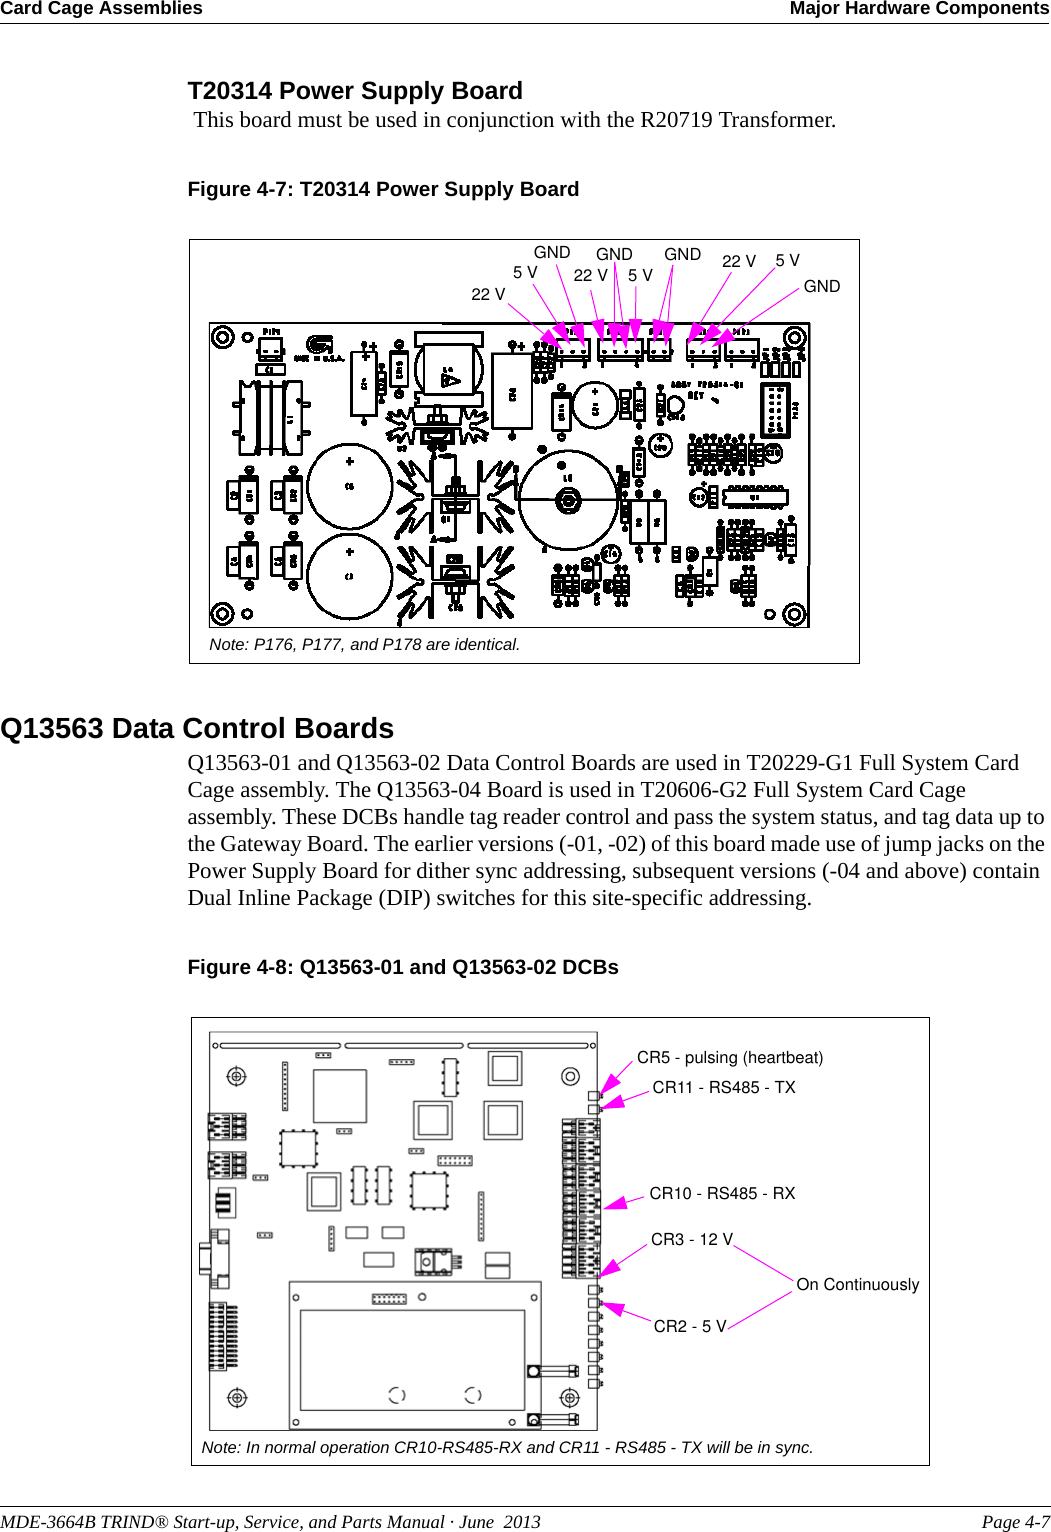 MDE-3664B TRIND® Start-up, Service, and Parts Manual · June  2013 Page 4-7Card Cage Assemblies Major Hardware ComponentsT20314 Power Supply Board This board must be used in conjunction with the R20719 Transformer.Figure 4-7: T20314 Power Supply Board5 VGND22 VGND GND5 V 22 VGNDNote: P176, P177, and P178 are identical.22 V5 VQ13563 Data Control BoardsQ13563-01 and Q13563-02 Data Control Boards are used in T20229-G1 Full System Card Cage assembly. The Q13563-04 Board is used in T20606-G2 Full System Card Cage assembly. These DCBs handle tag reader control and pass the system status, and tag data up to the Gateway Board. The earlier versions (-01, -02) of this board made use of jump jacks on the Power Supply Board for dither sync addressing, subsequent versions (-04 and above) contain Dual Inline Package (DIP) switches for this site-specific addressing.Figure 4-8: Q13563-01 and Q13563-02 DCBsCR5 - pulsing (heartbeat) CR11 - RS485 - TXCR10 - RS485 - RXNote: In normal operation CR10-RS485-RX and CR11 - RS485 - TX will be in sync.CR3 - 12 VCR2 - 5 VOn Continuously